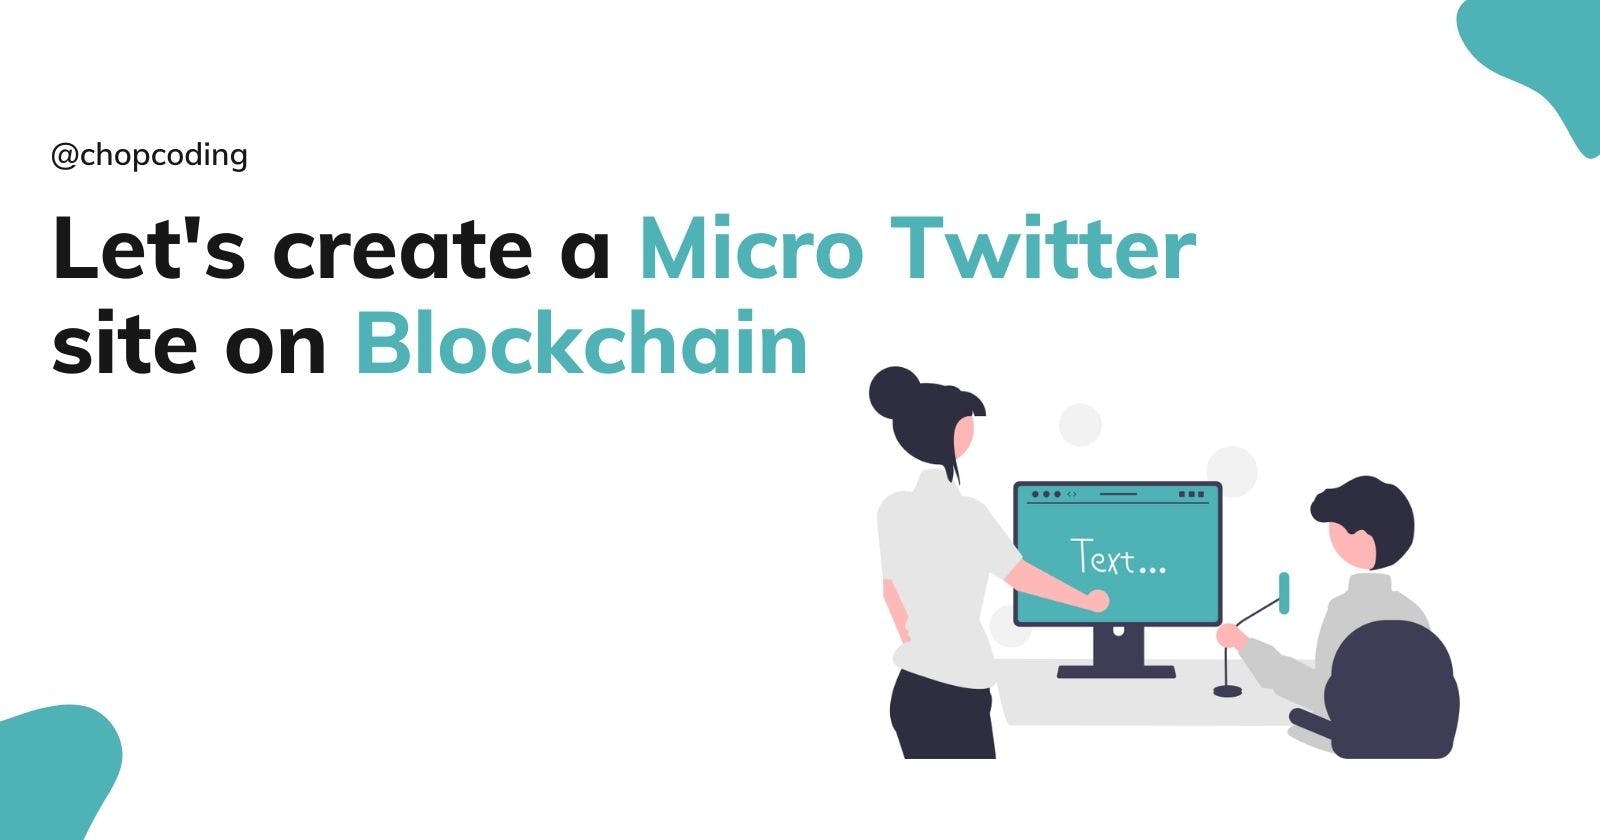 Let's create a Micro Twitter site on Blockchain